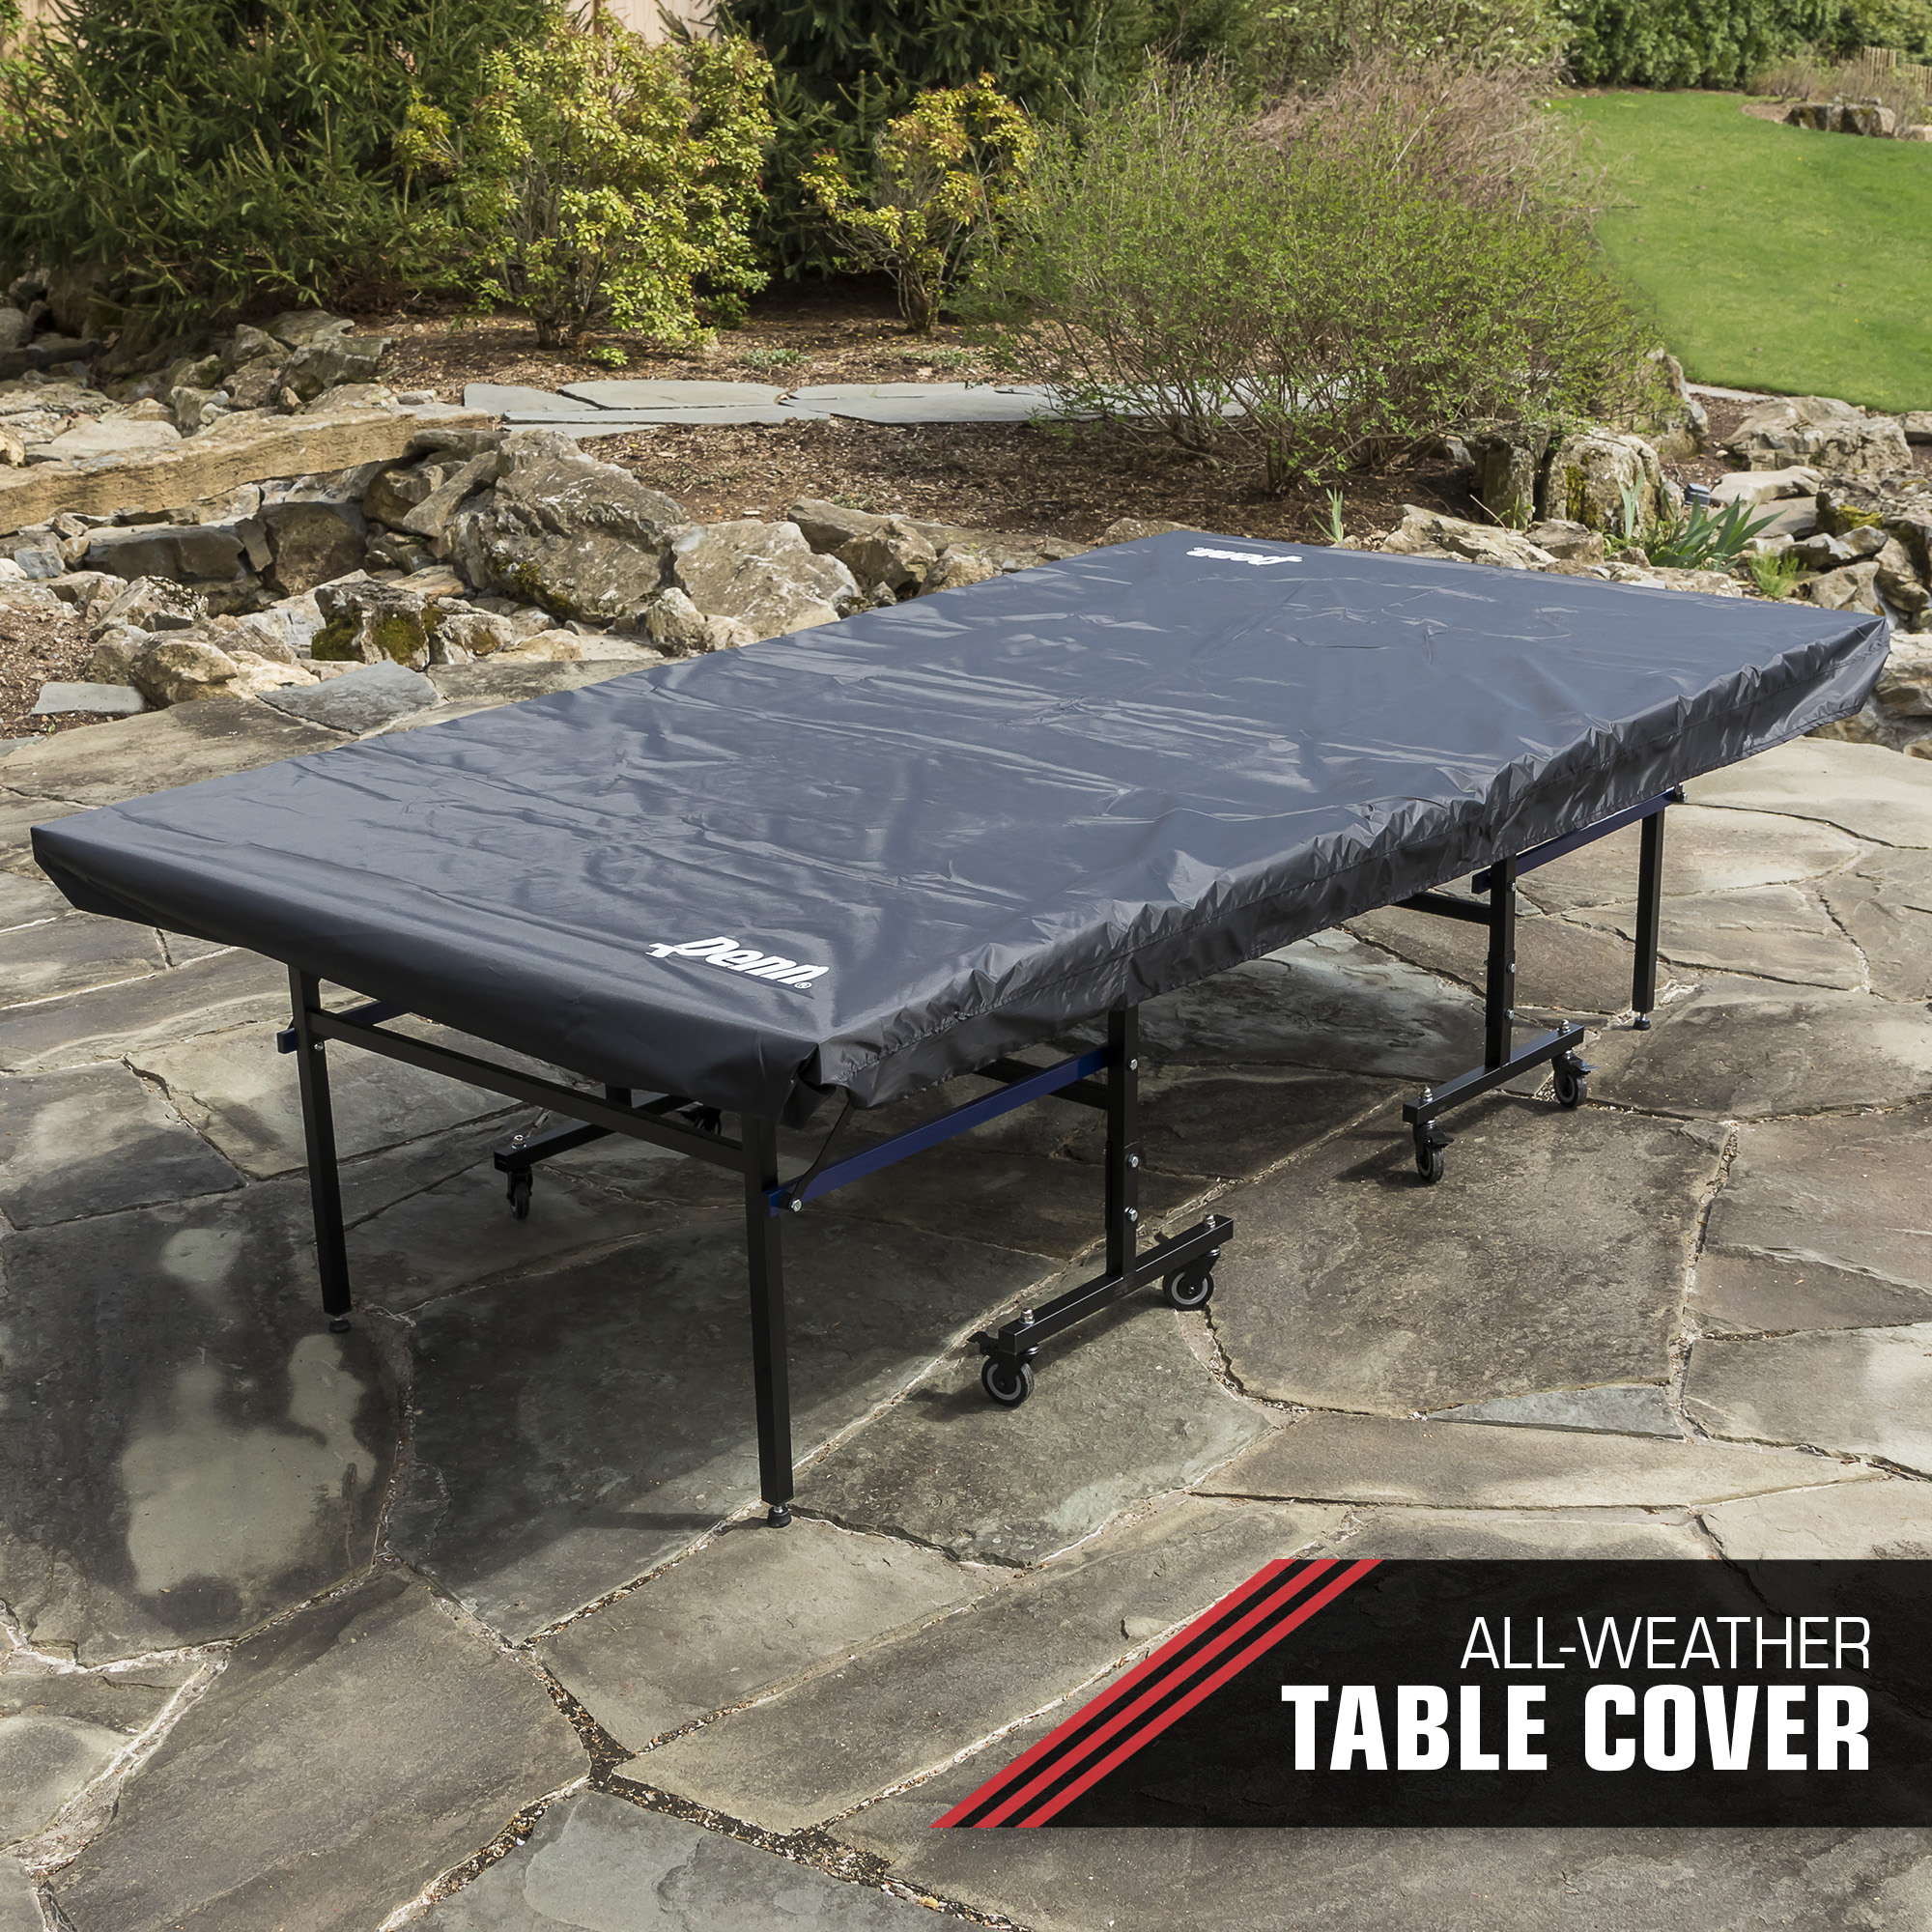 Penn Acadia Outdoor Table Tennis Table with Cover; 10 Minute Setup - image 3 of 11